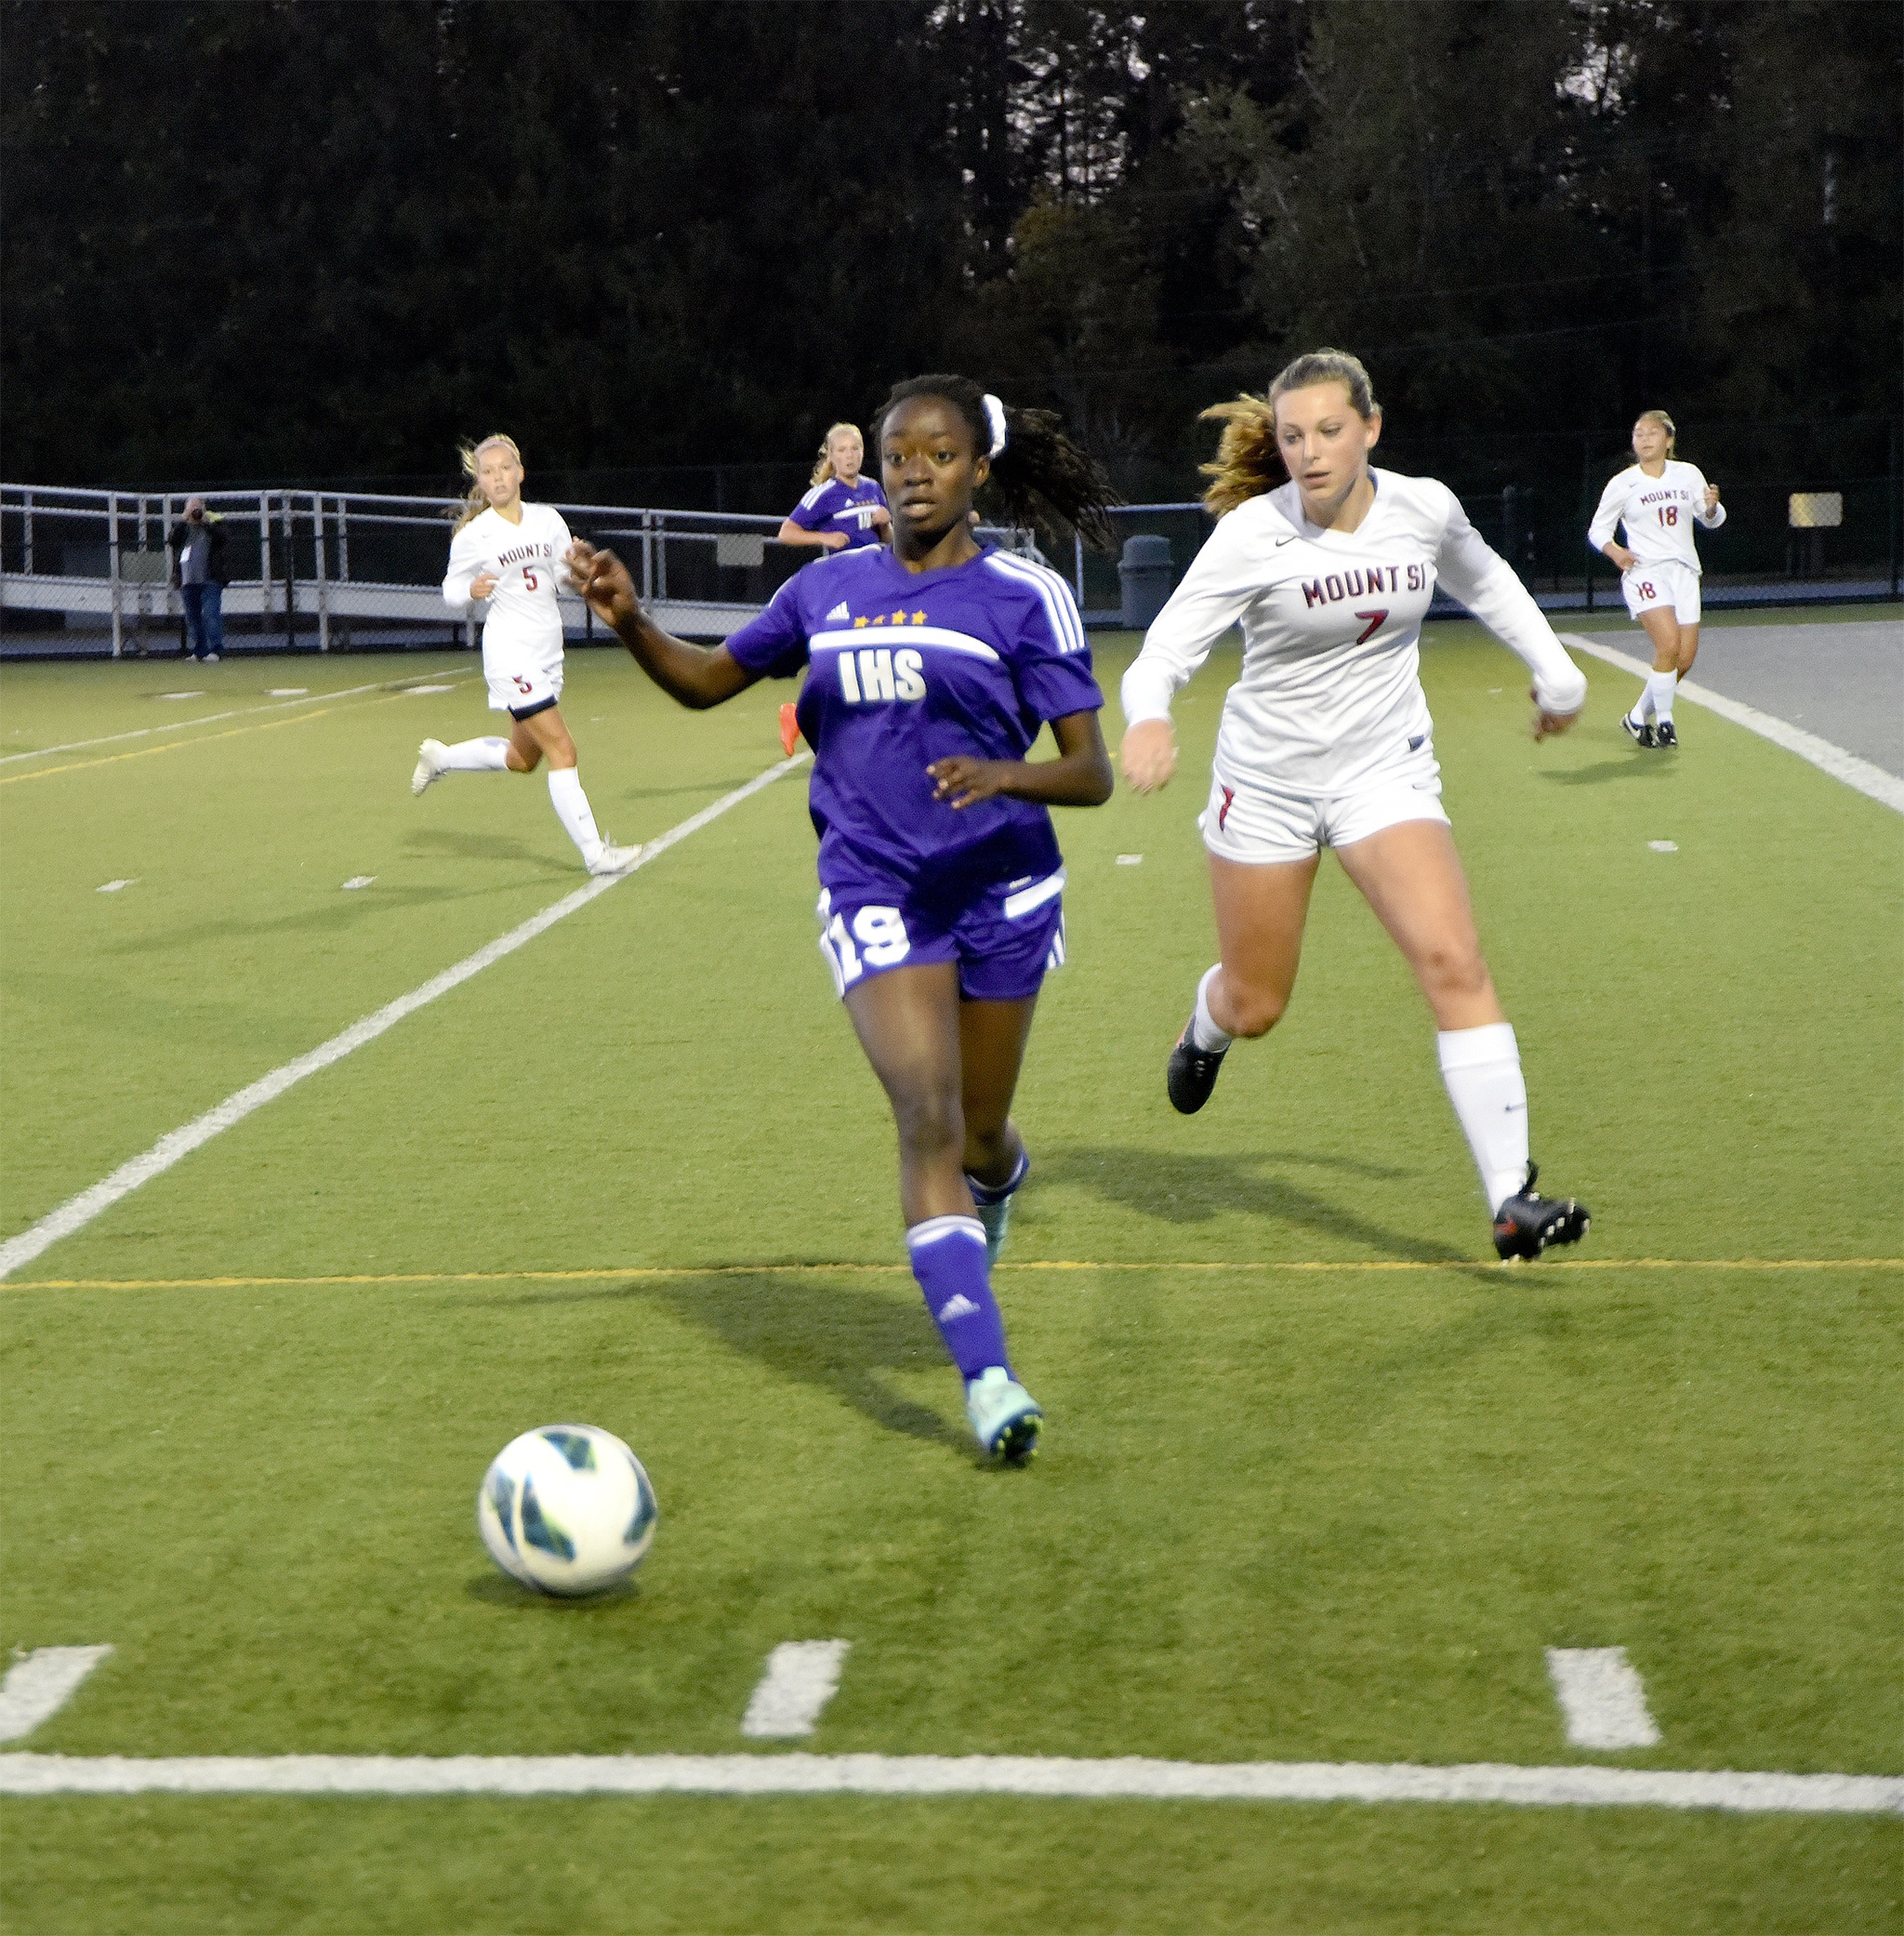 Issaquah’s Siarfo Abekah and Mount Si’s Olivia Henning run down a loose ball in the Wildcats’ Sept. 8 home soccer game.Carol Ladwig/Staff Photo